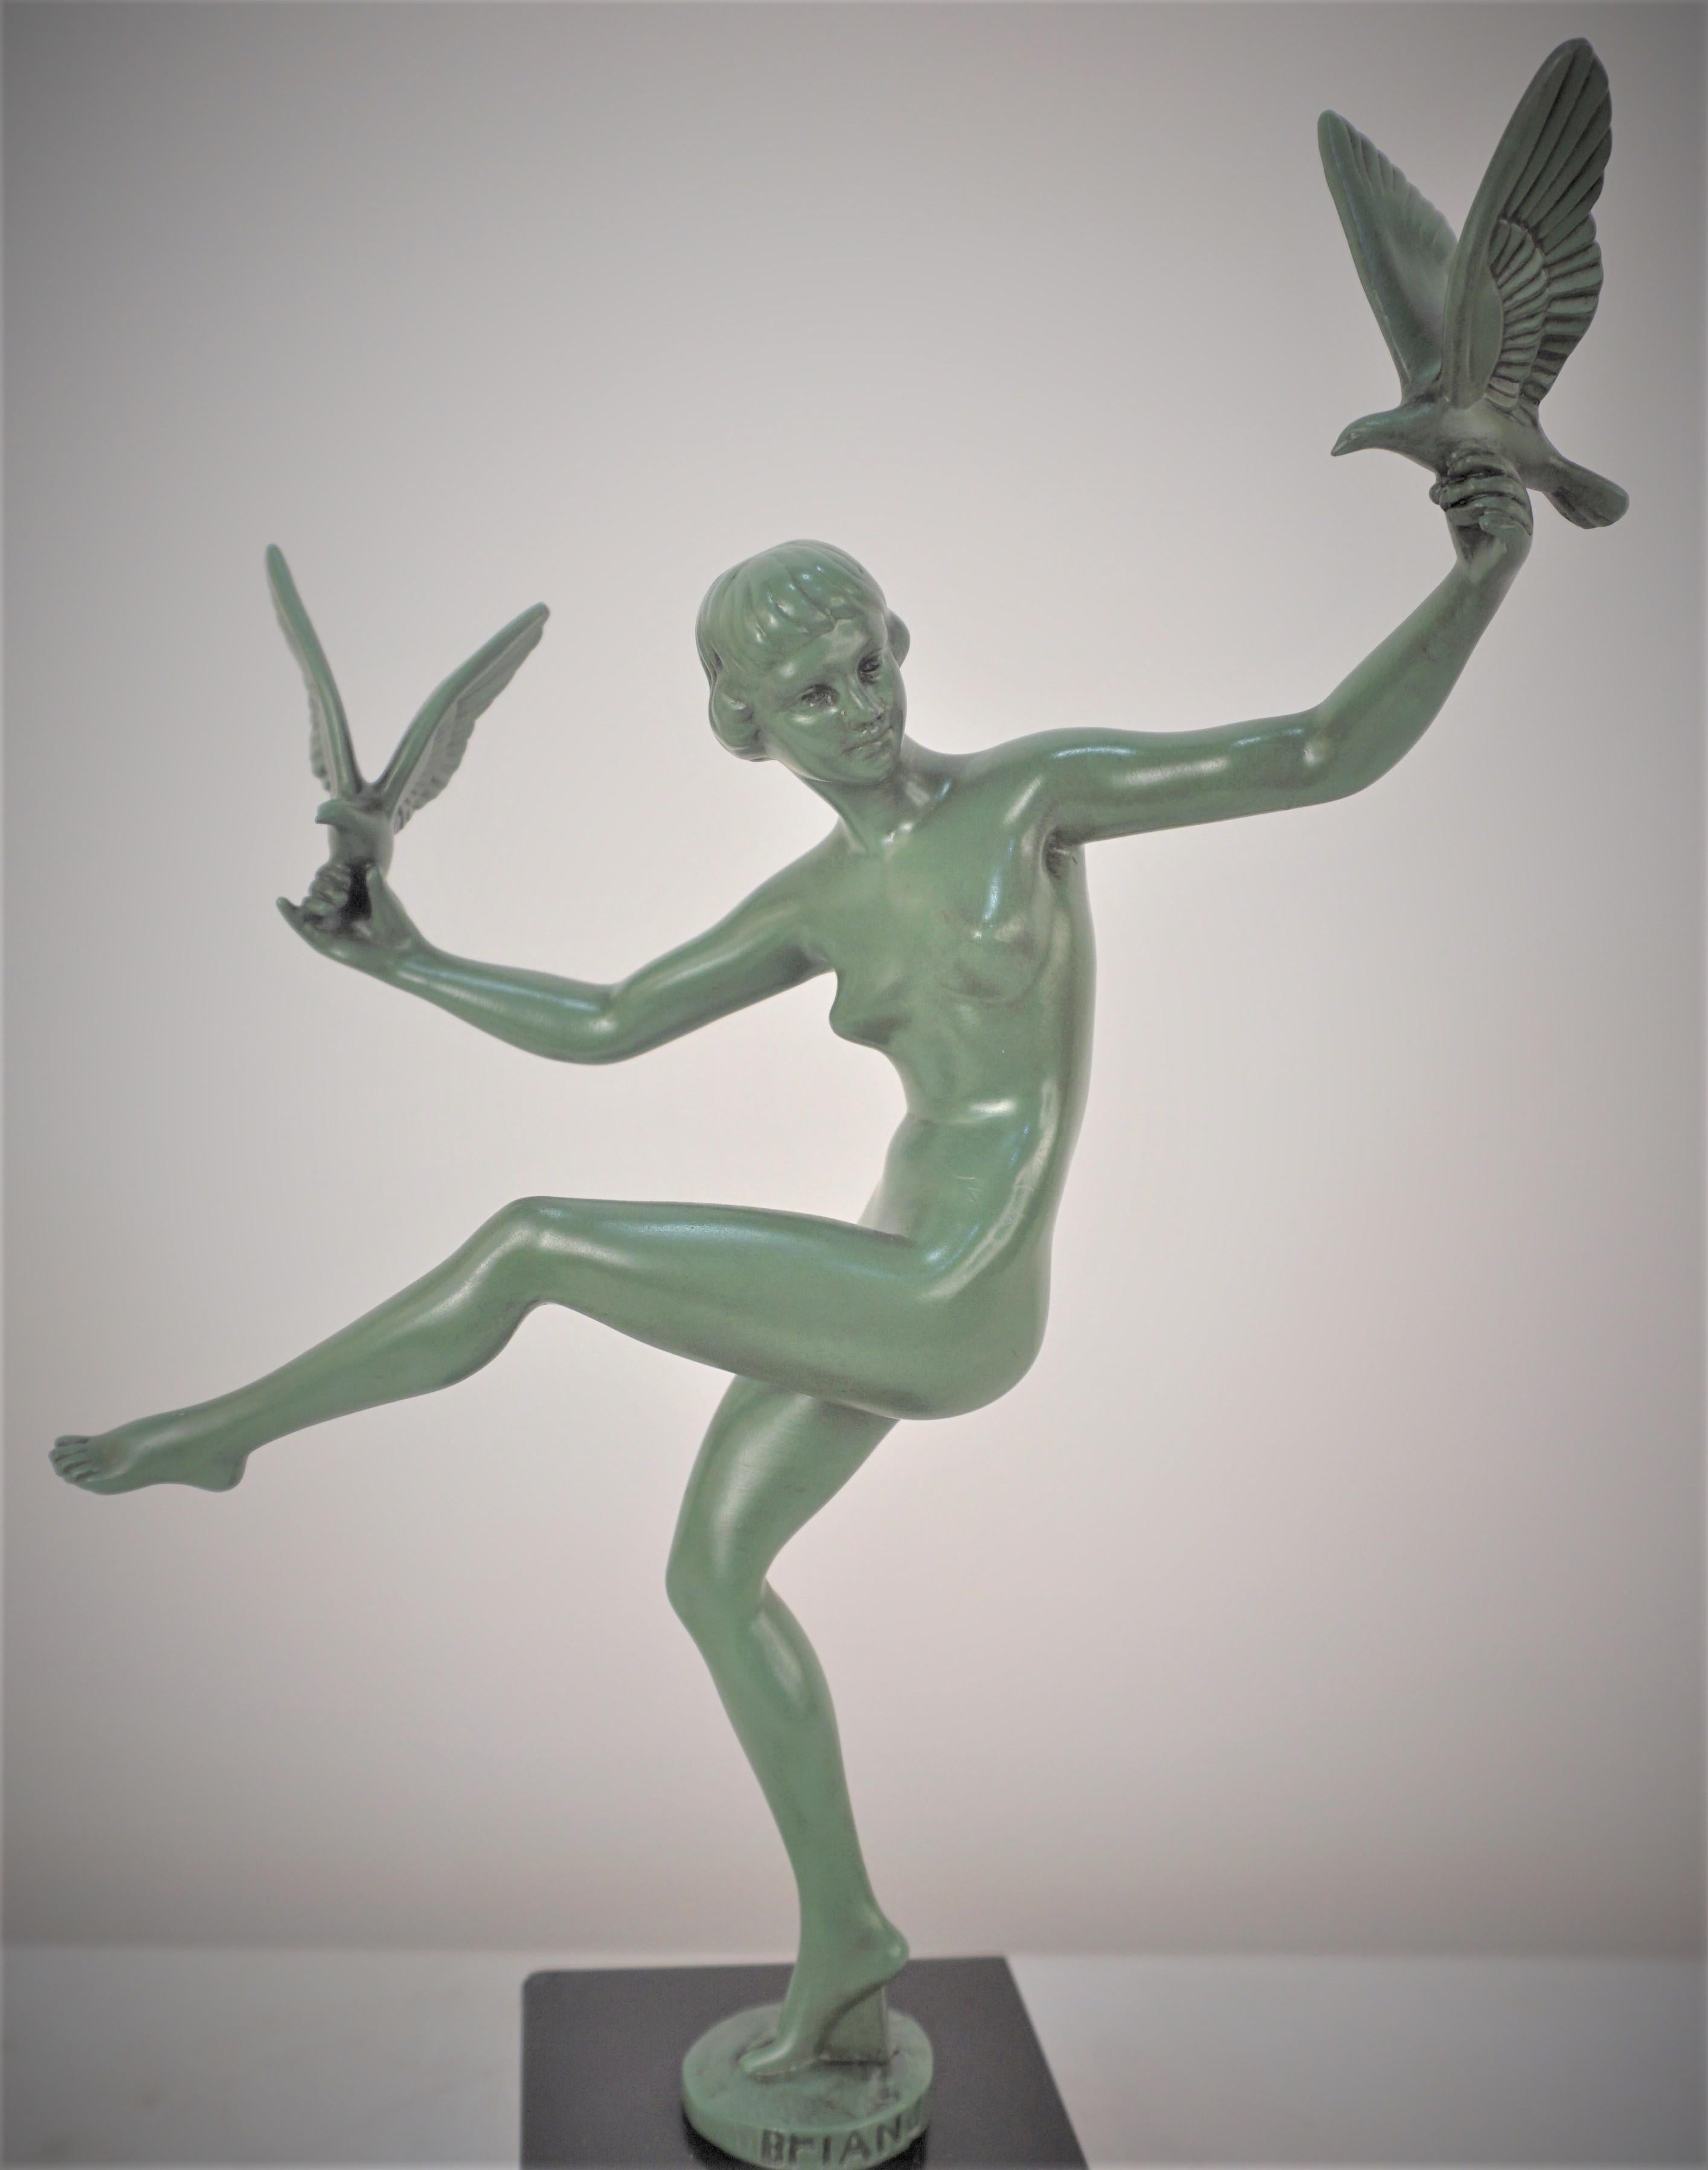 Bird dancer by Max Le Verrier foundry, Paris in the 1930’s finished in green standing over a square black marble base.